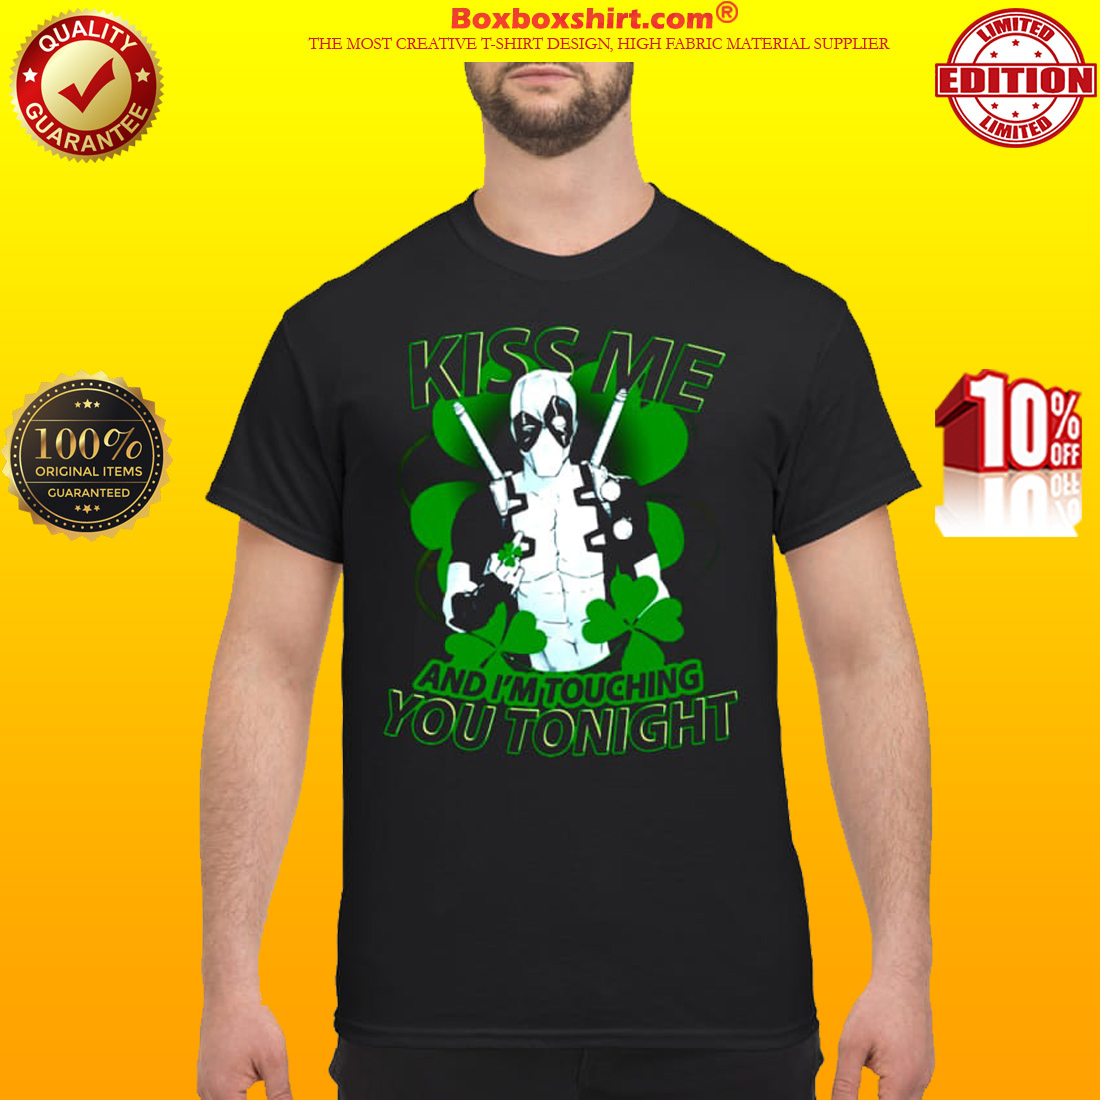 [10% OFF] St Patrick day Deadpool Kiss me and I'm touching you tonight ...